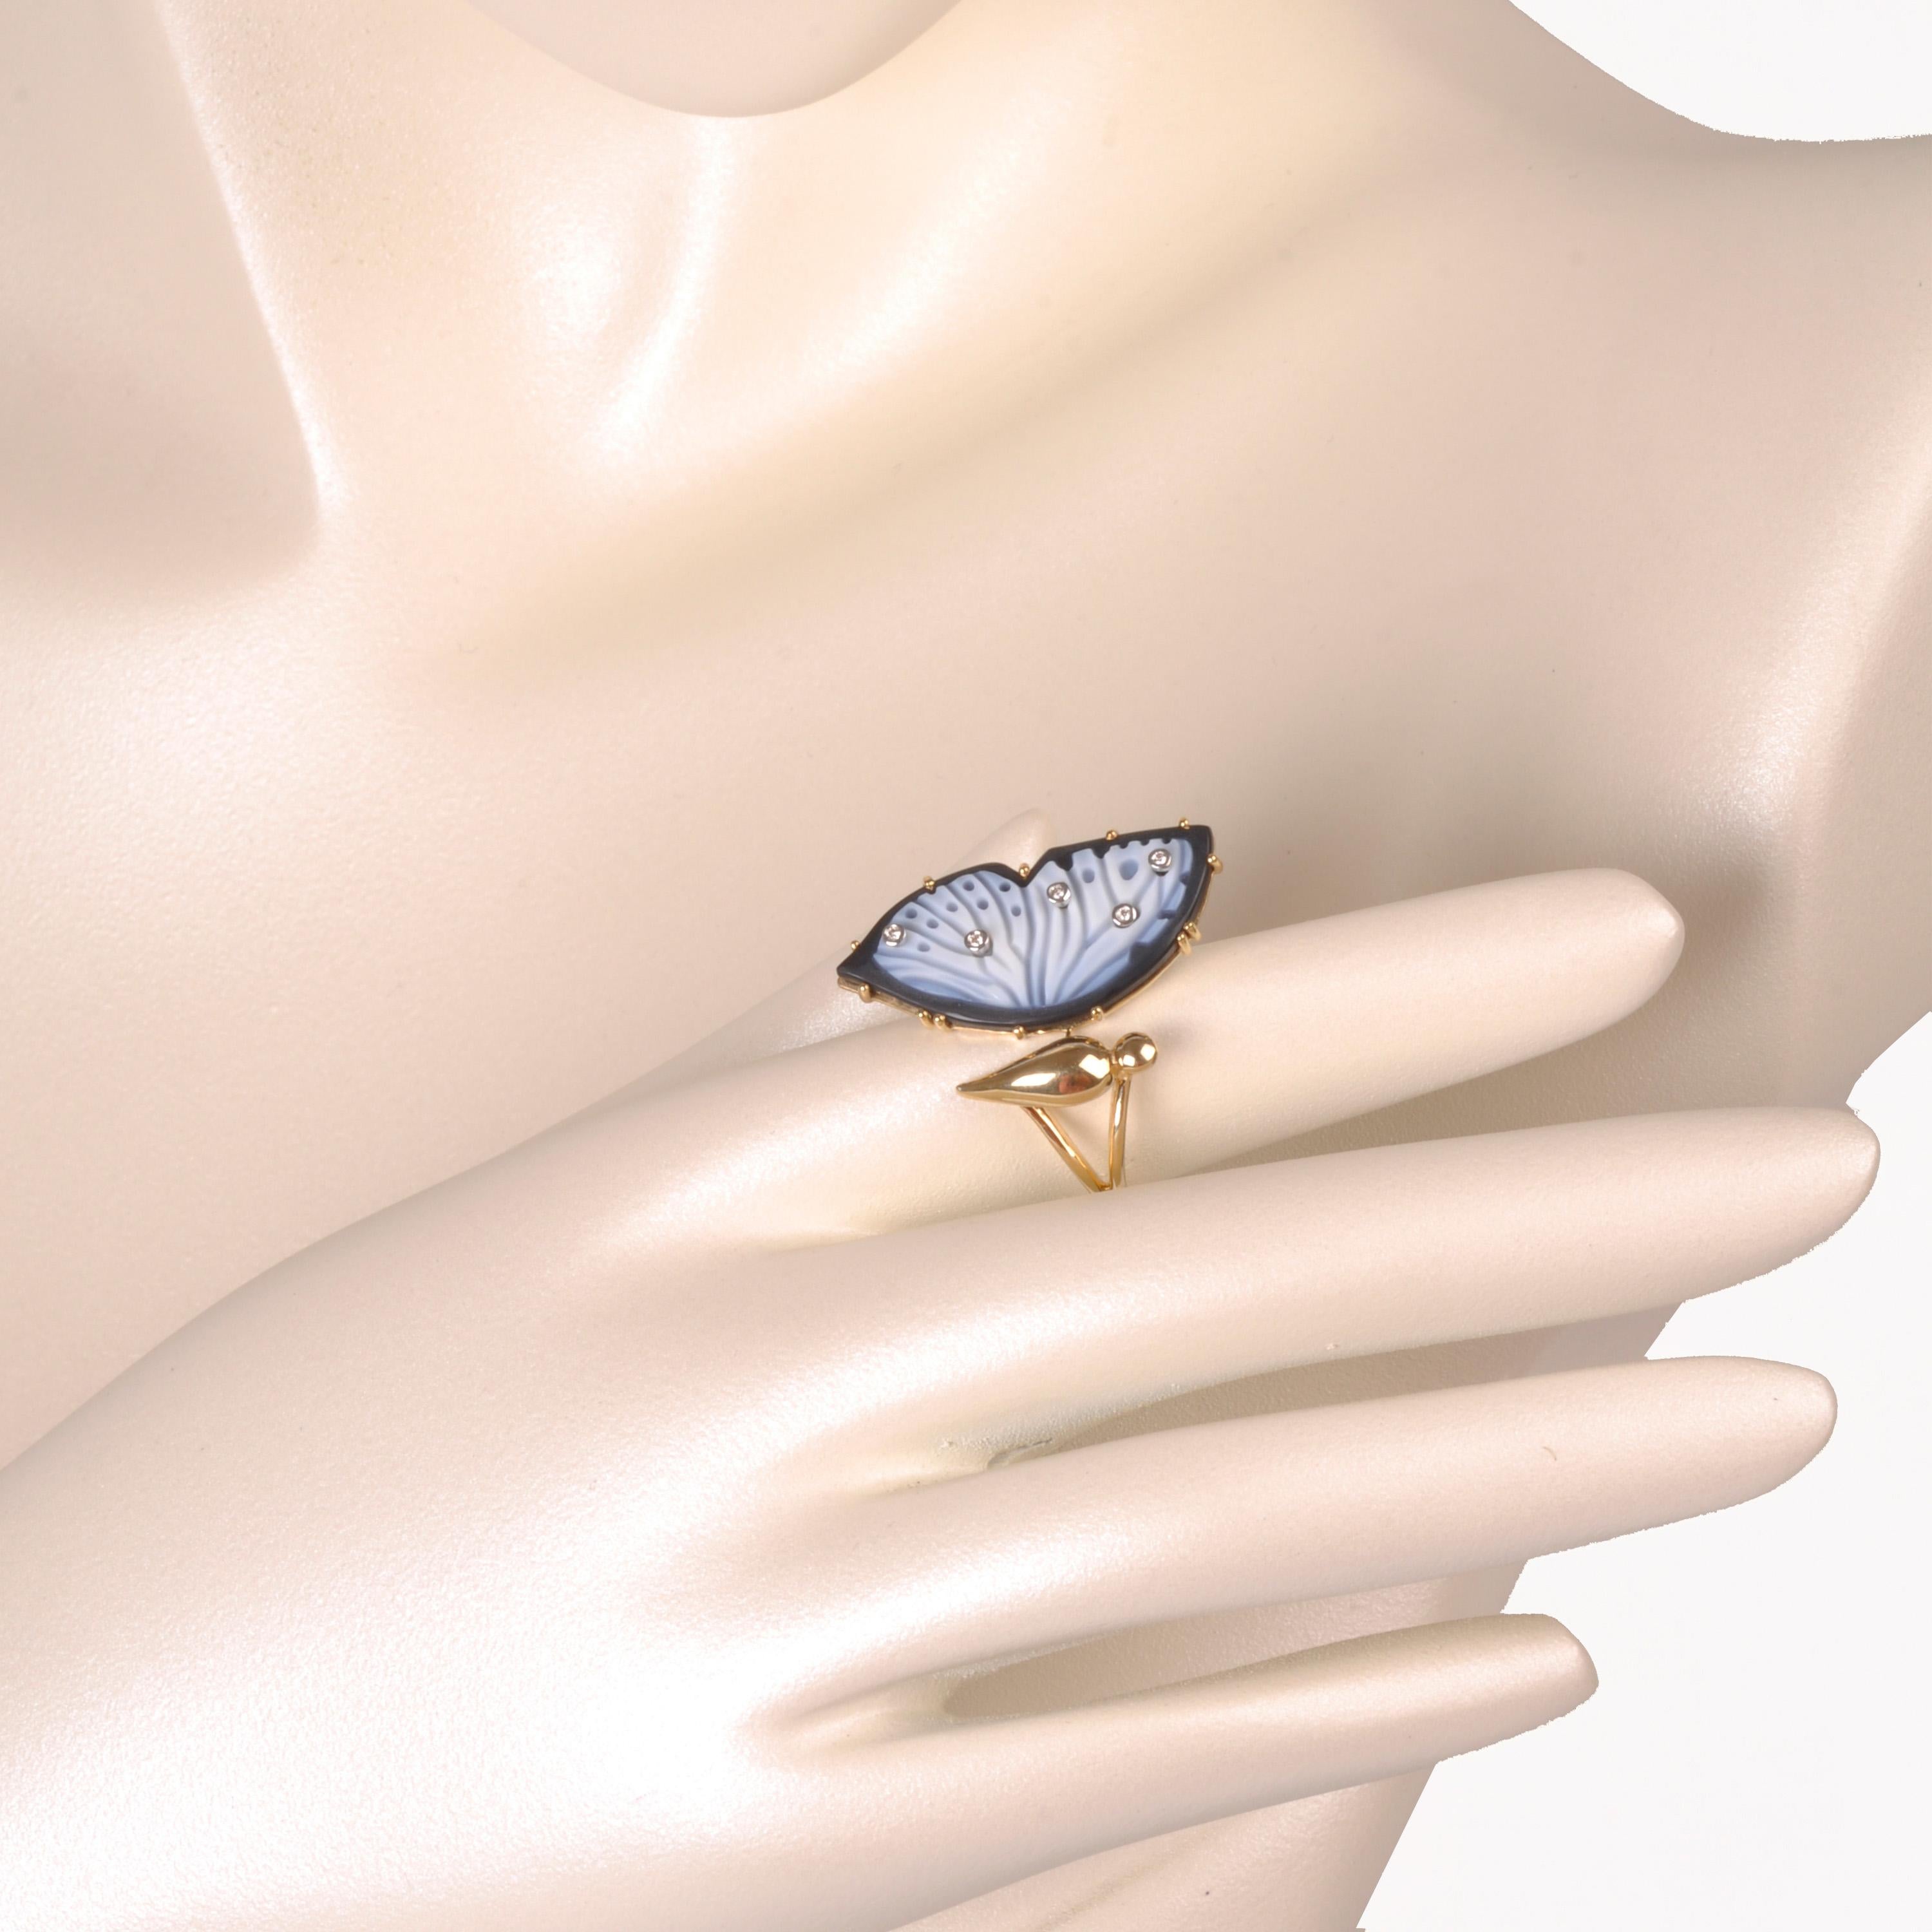 This 18K gold natural agate butterfly diamond ring is a symbol of transformation and grace. This exquisite ring captures the delicate elegance of a butterfly in flight, a reminder of boundless possibilities through change.

The body is depicted in